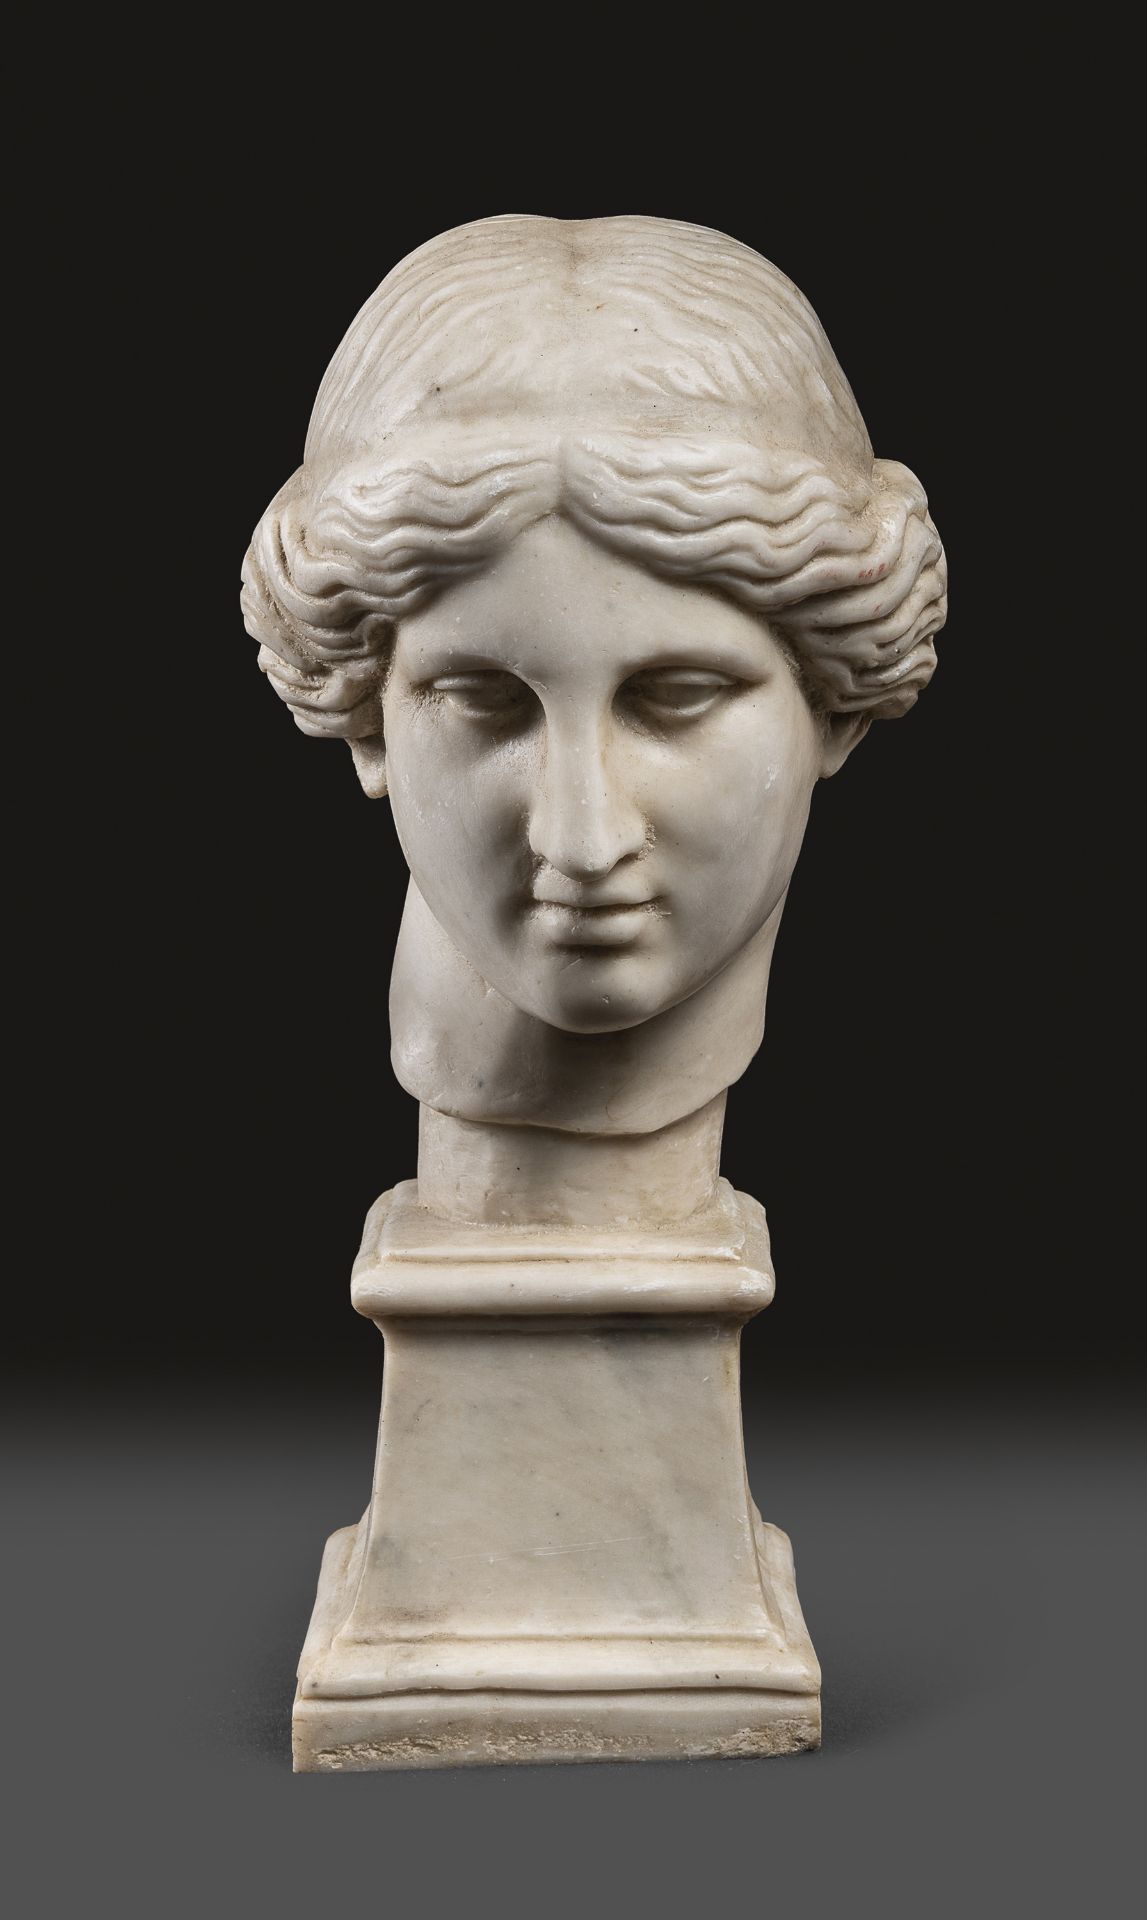 MARBLE DUST HEAD OF DIANA EARLY 20TH CENTURY